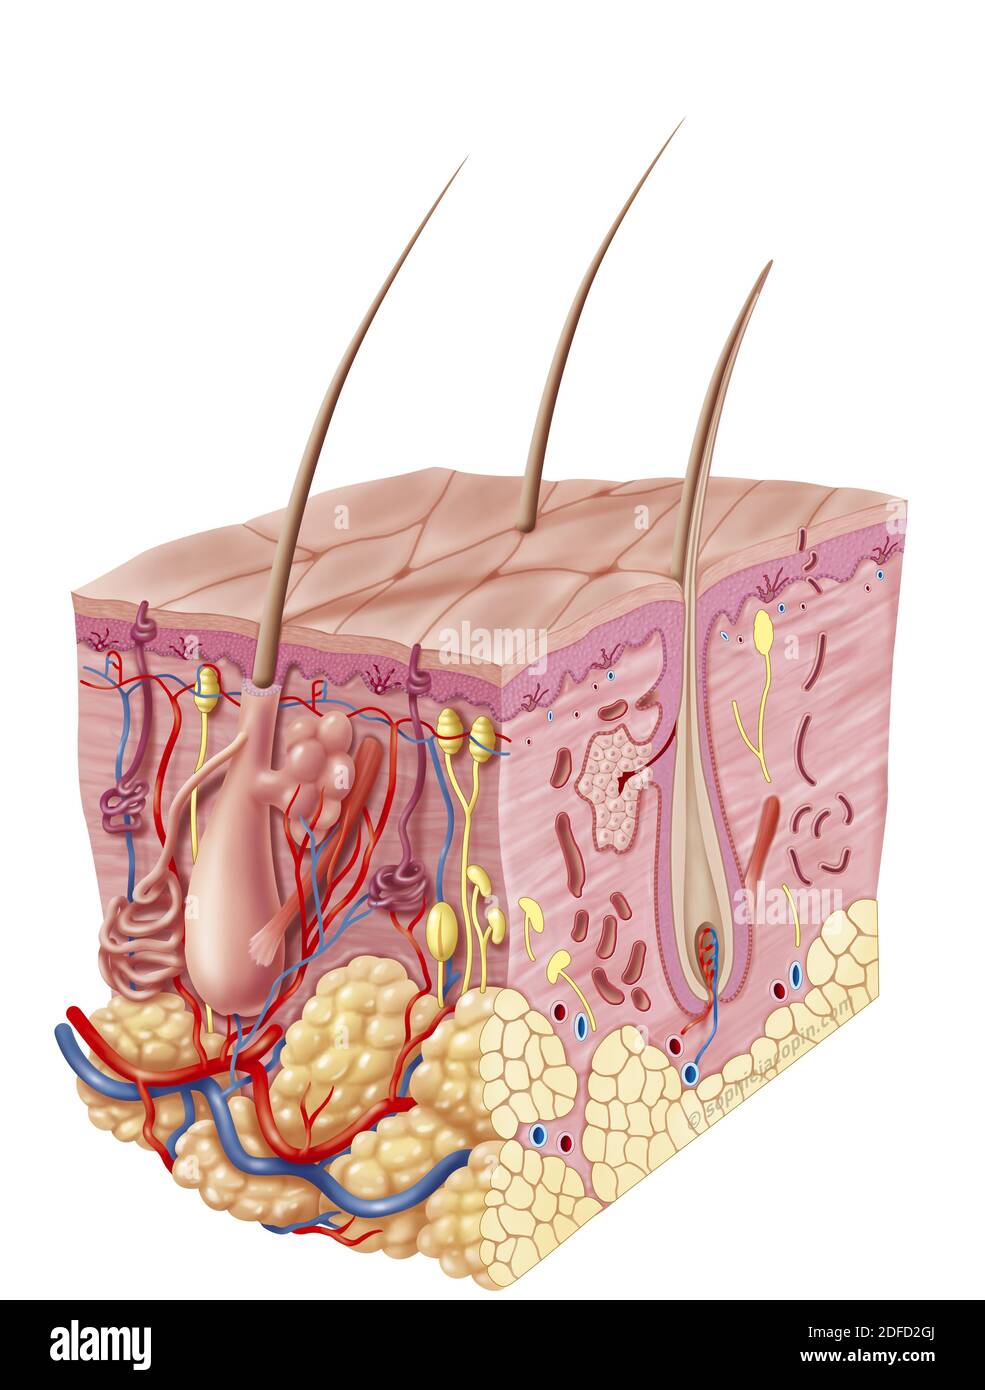 Adult skin structure, anatomy, appendages of the integumentary system. This illustration represents a 3D section view of 3/4 of the anatomy and struct Stock Photo